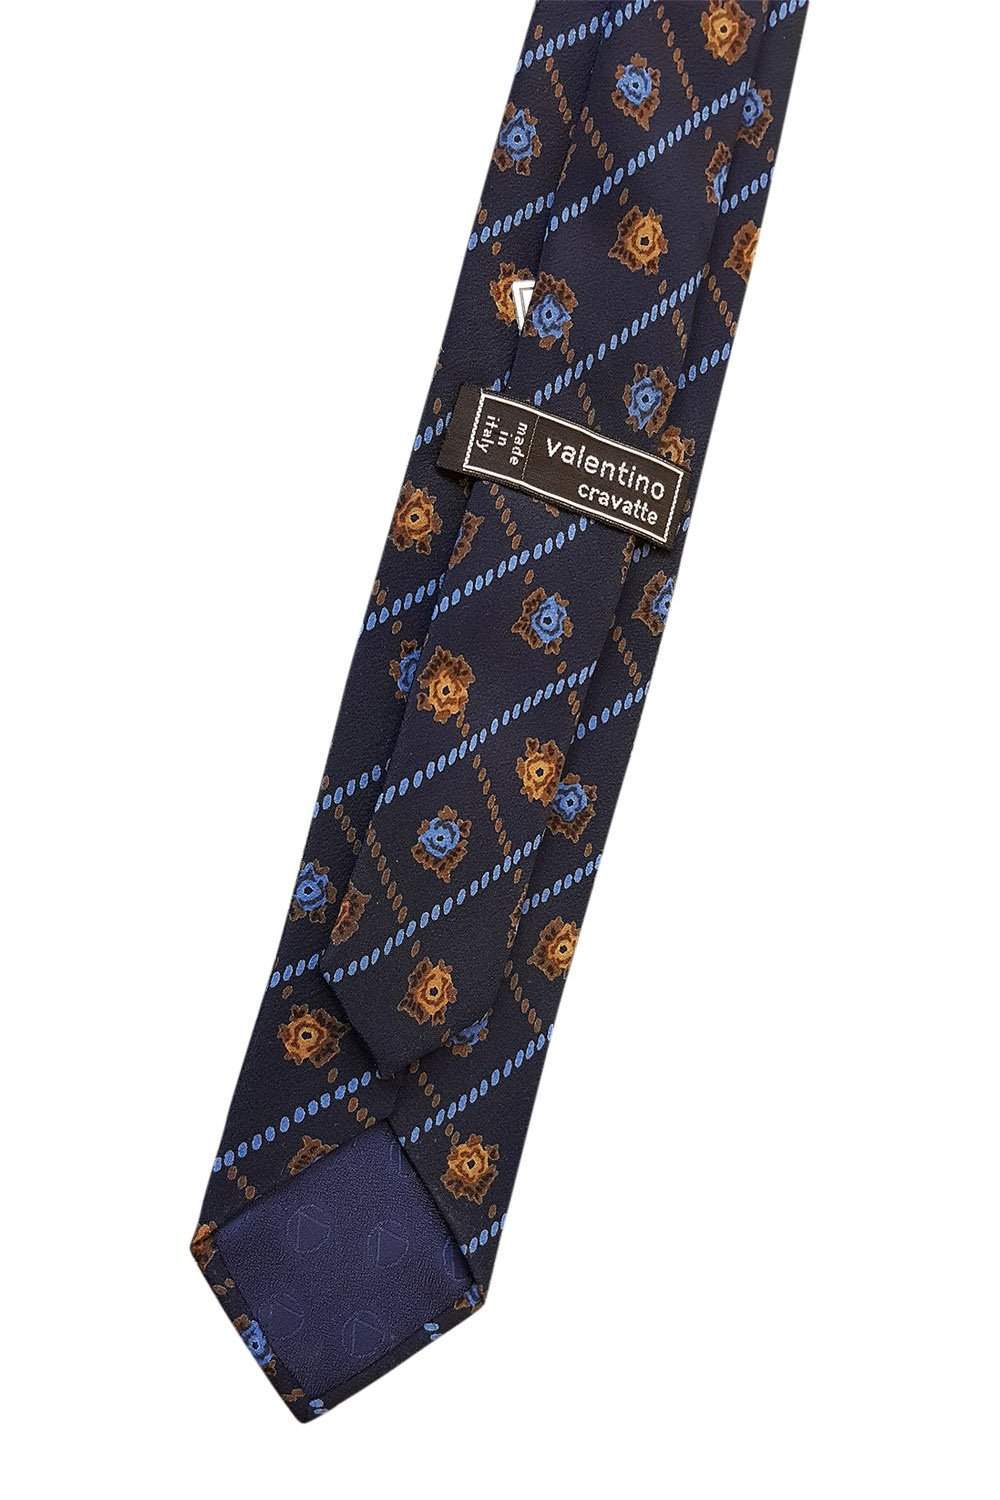 VALENTINO Vintage Silk Blue Tie Abstract Floral Print Repeat (55")-Valentino-The Freperie